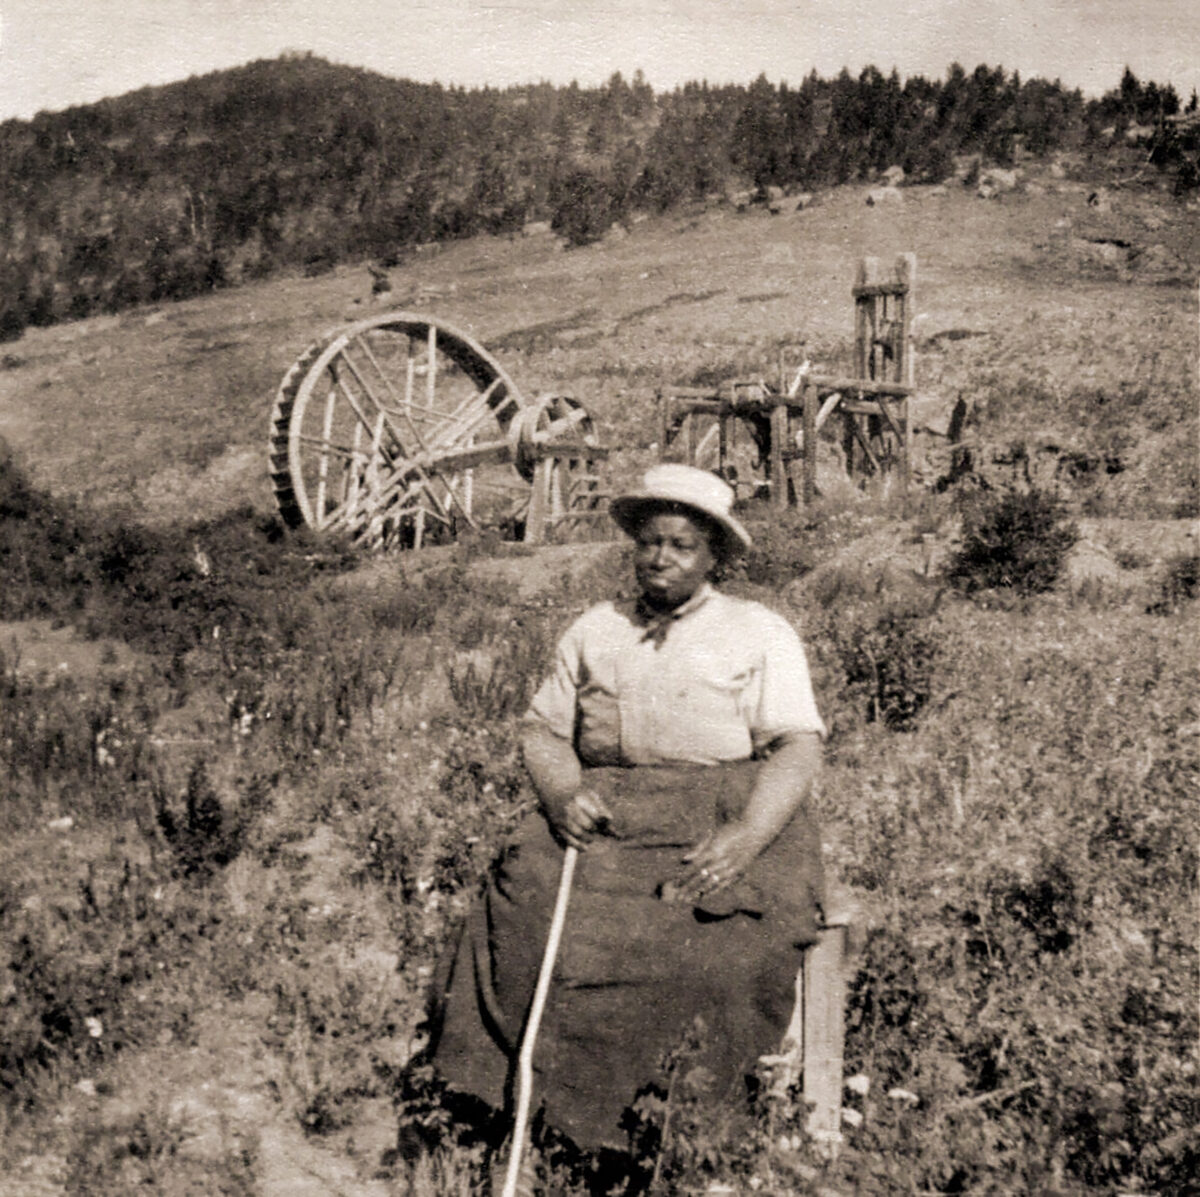 Millie Ringold sitting in a Montana field